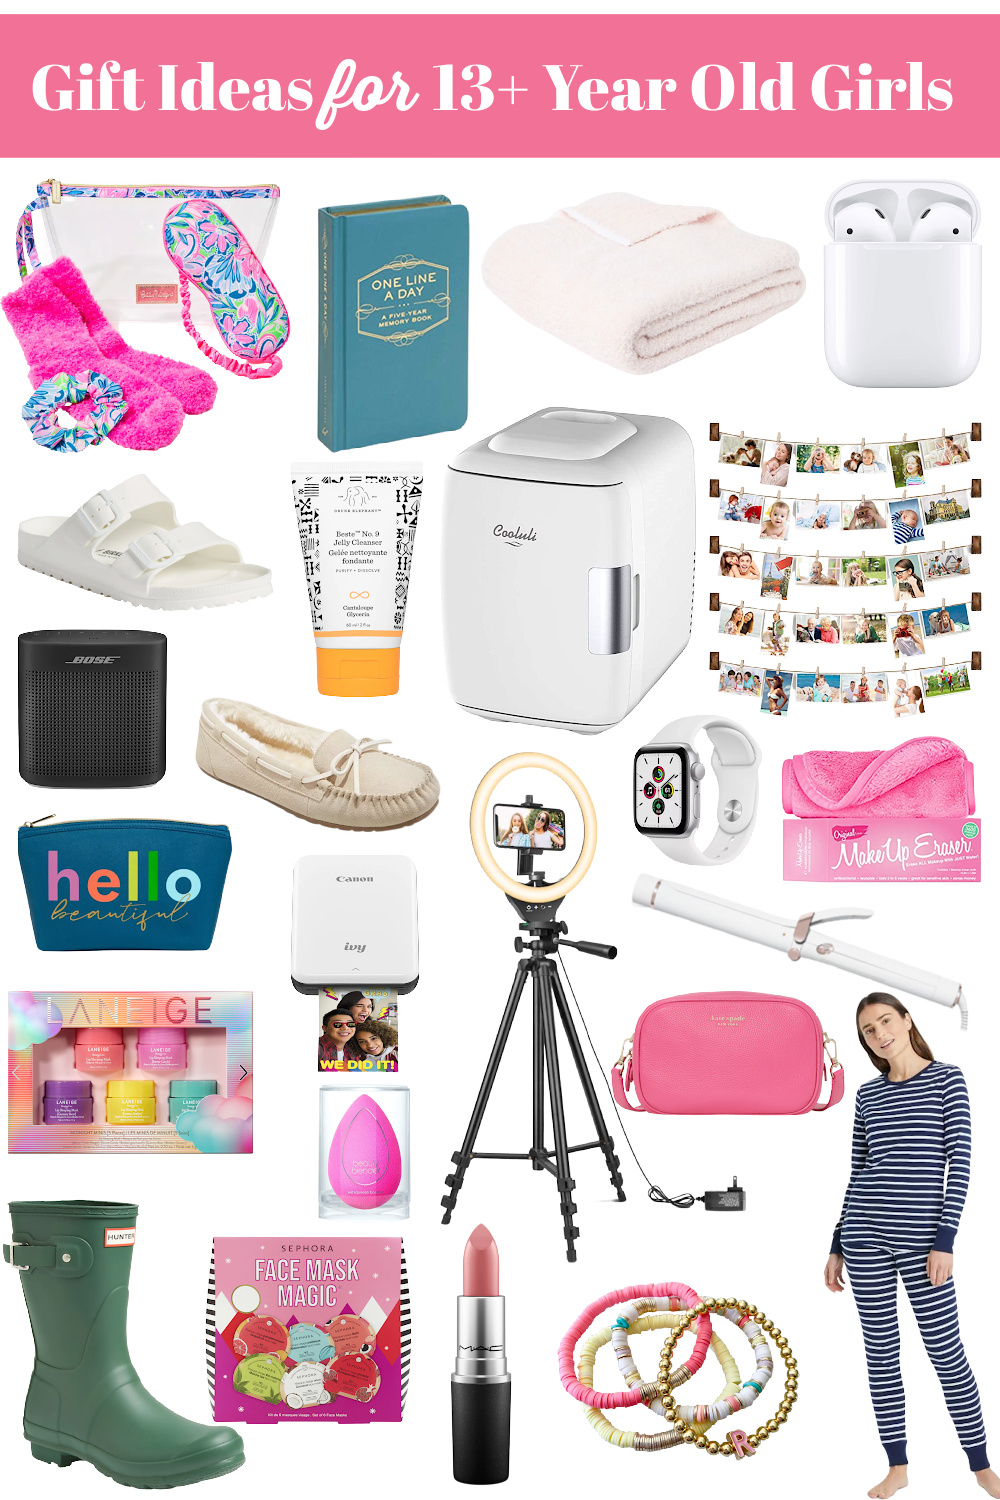 Gift Ideas for 13+ Year Old Girls